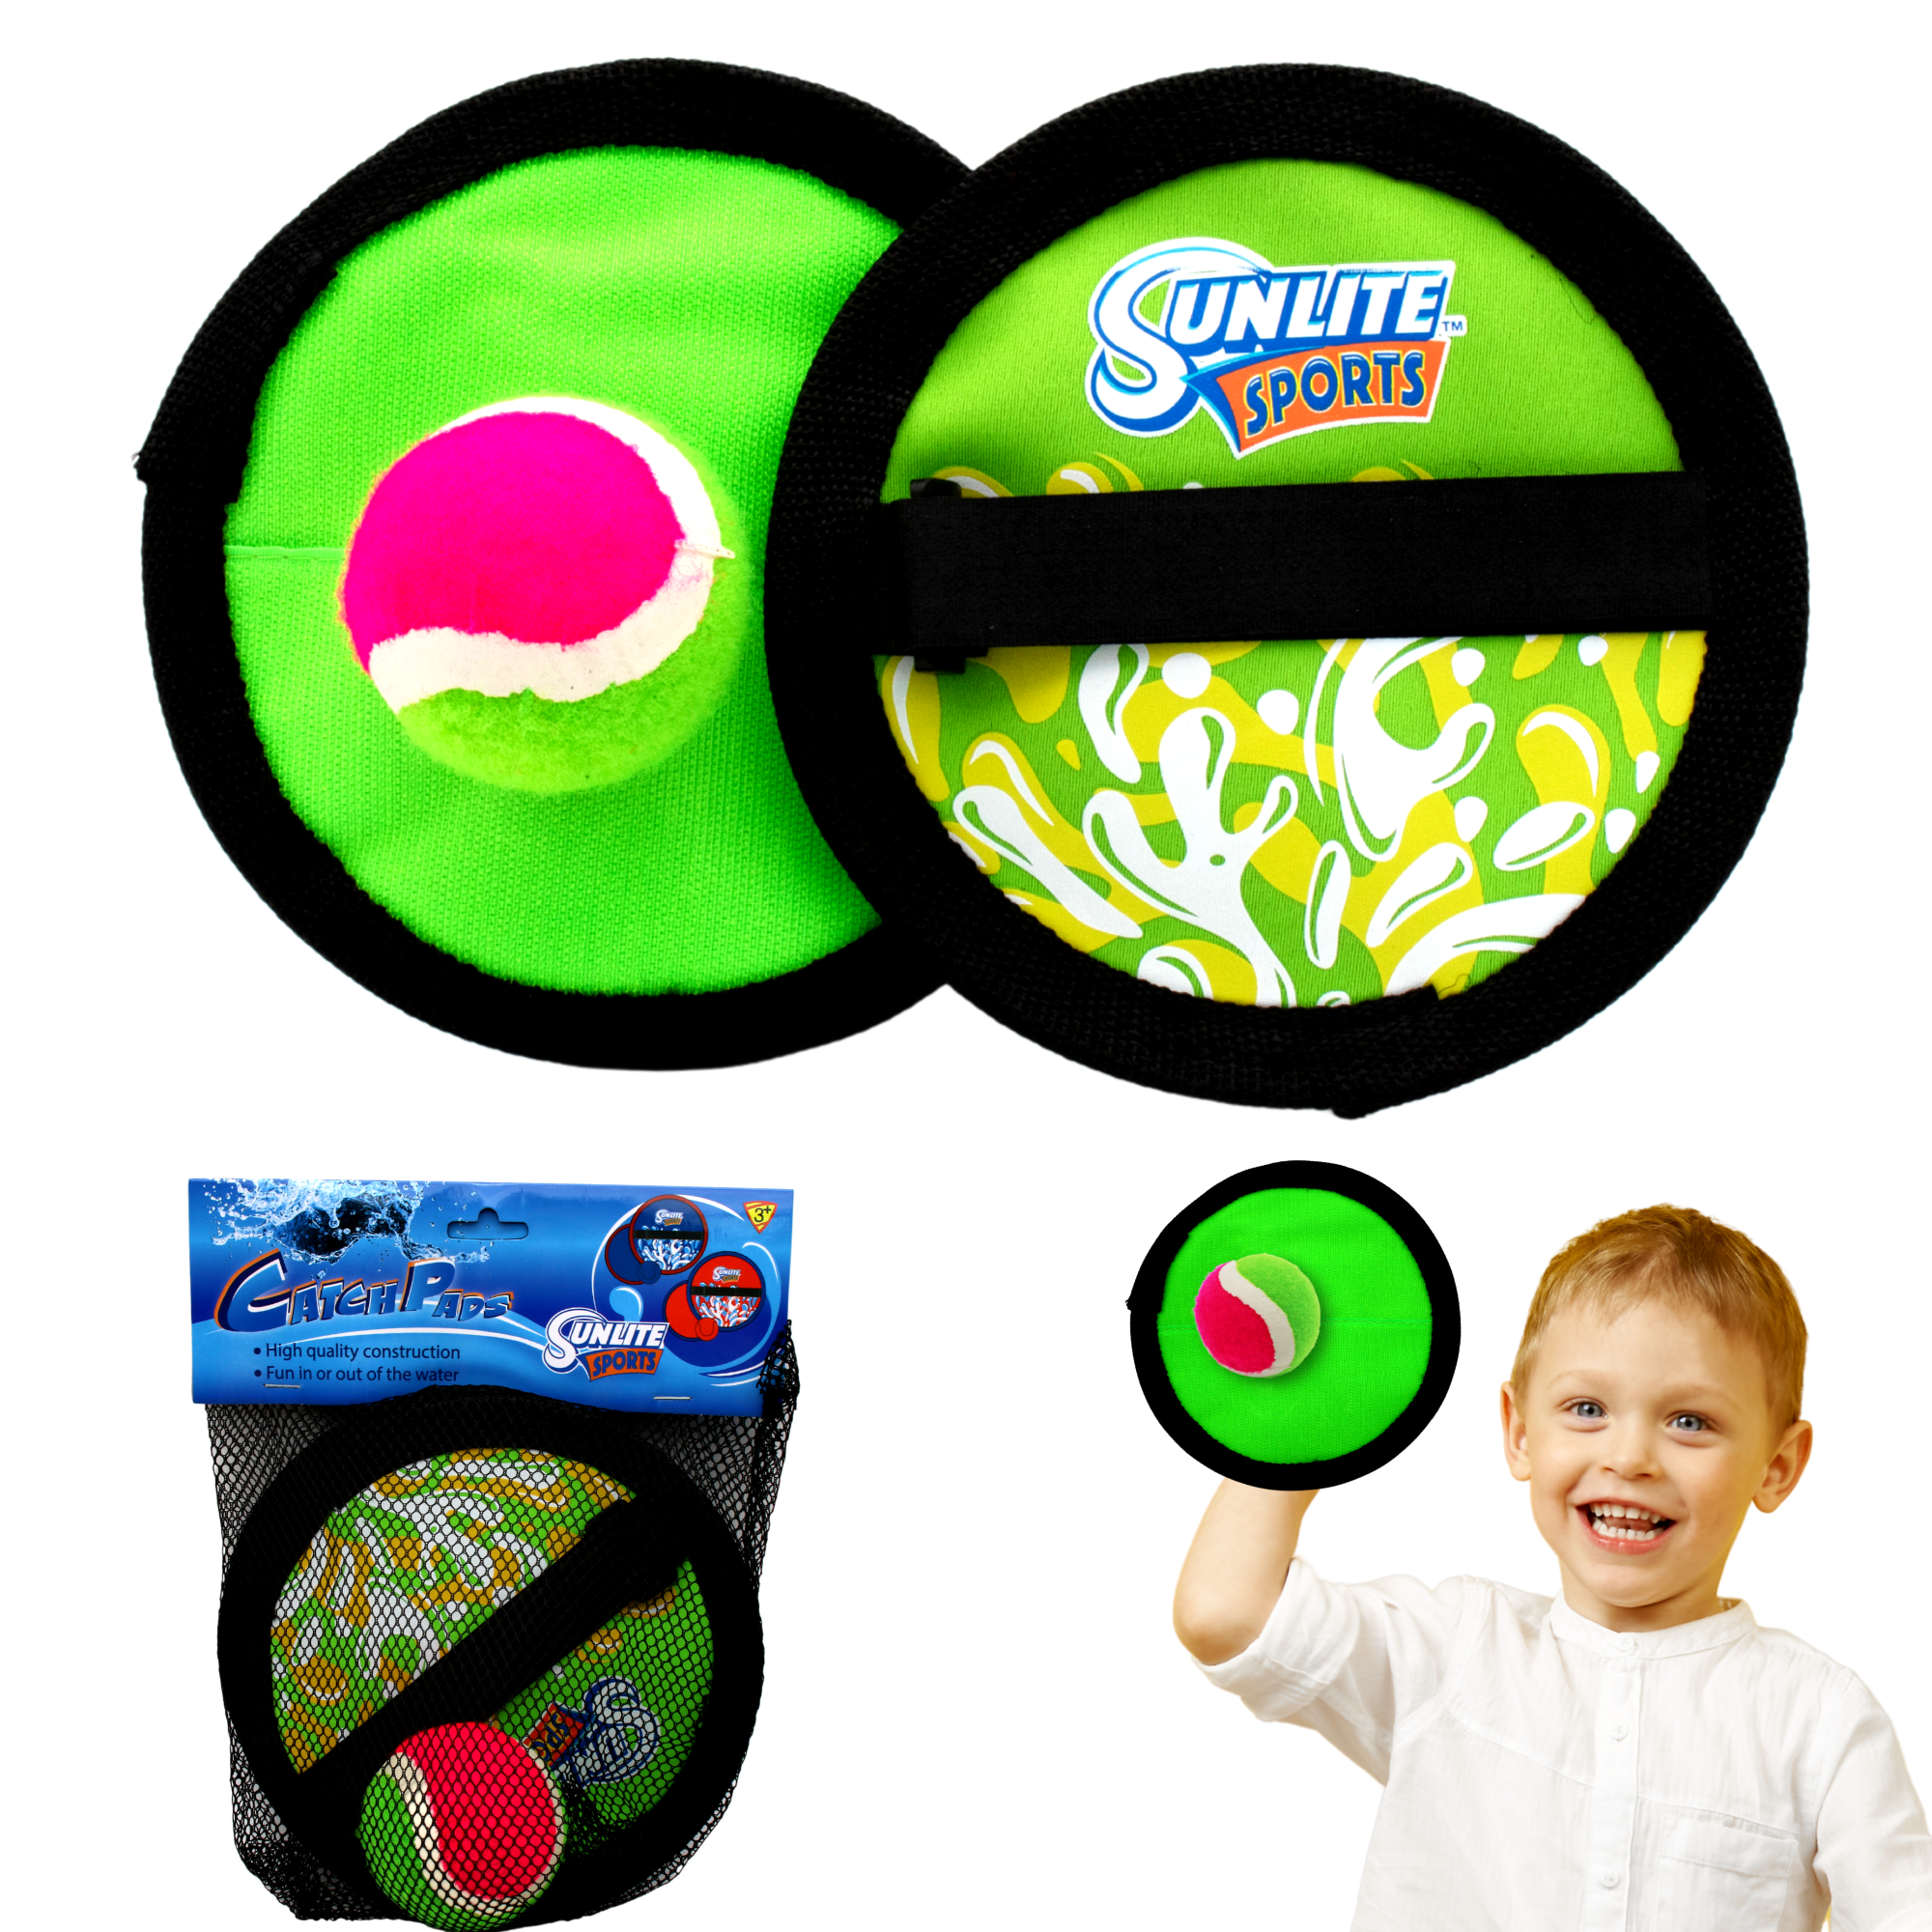 Sunlite Sports EZ Glove Toss and Catch Ball Game Set, Includes 2